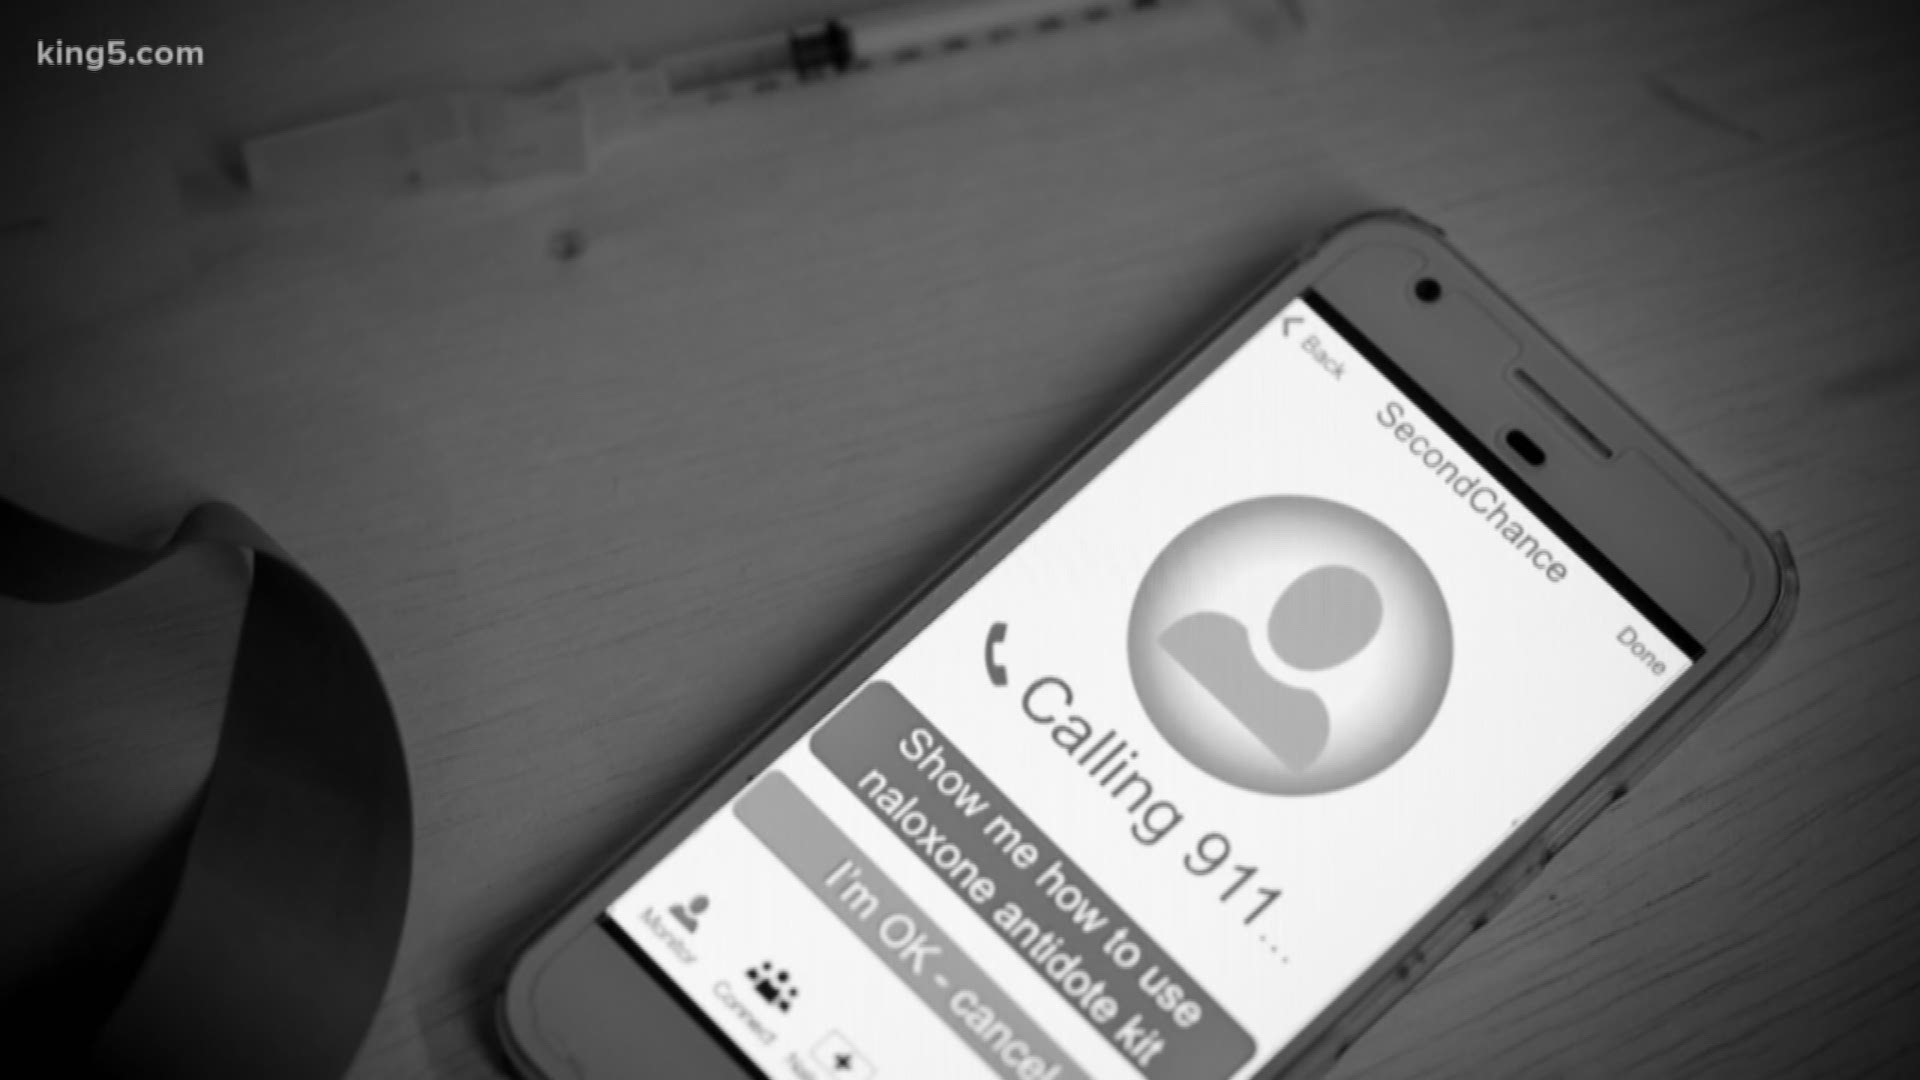 Researchers at the University of Washington developed an experimental mobile app called “Second Chance” that uses sonar to monitor a person’s breathing and sense when an opioid overdose occurs.